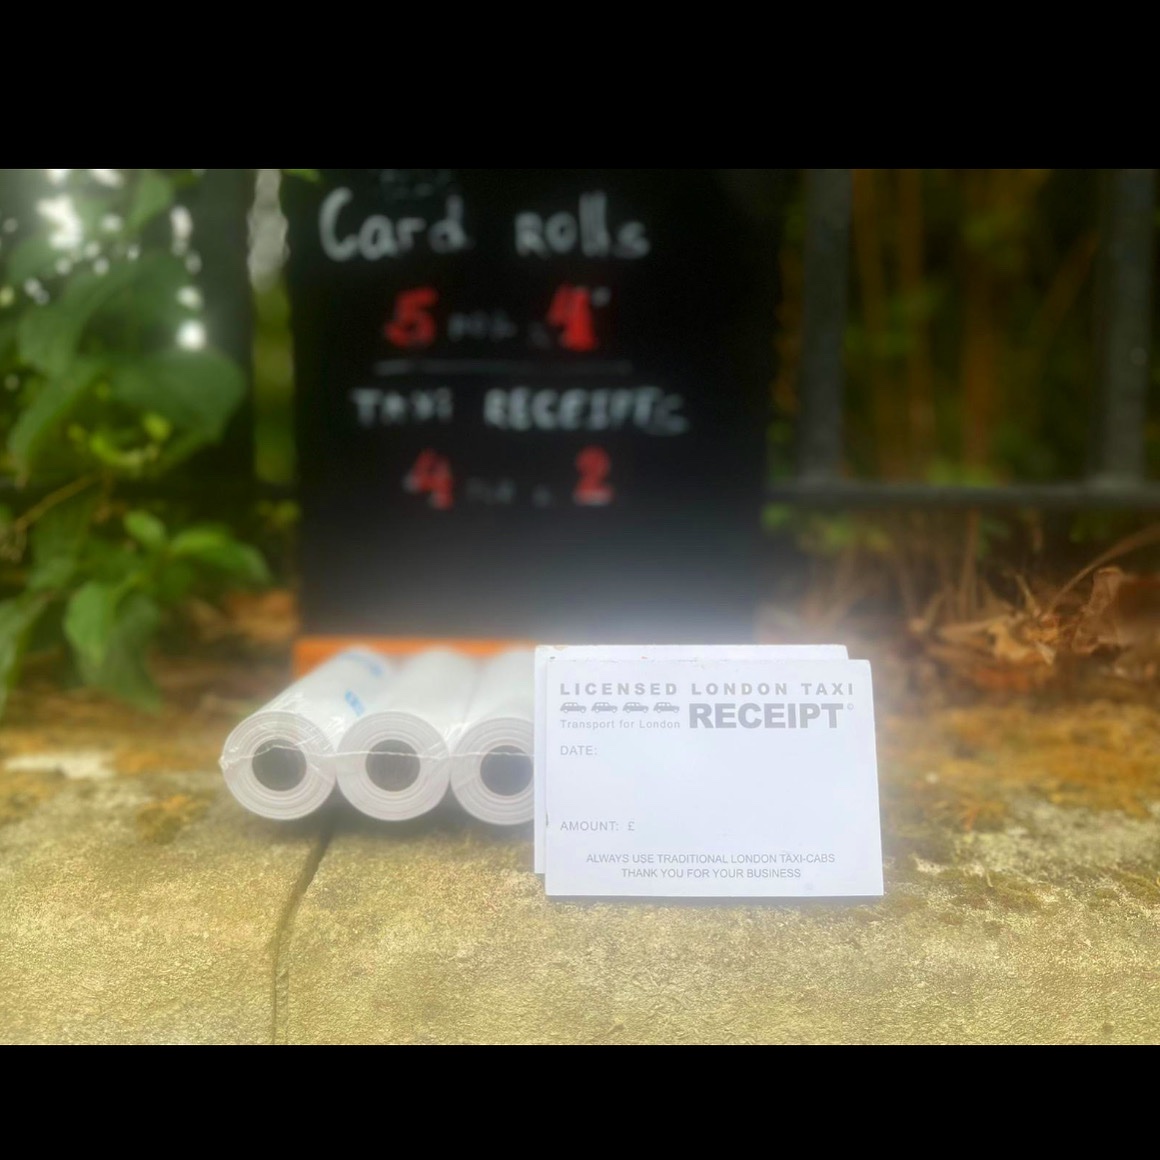 Friendly reminder to all cab drivers! I sell card paper rolls! So don’t be left short, come say hi, grab a coffee and your receipt paper! ☕️ 

#cabshelter #hydepark #london #londoncafe